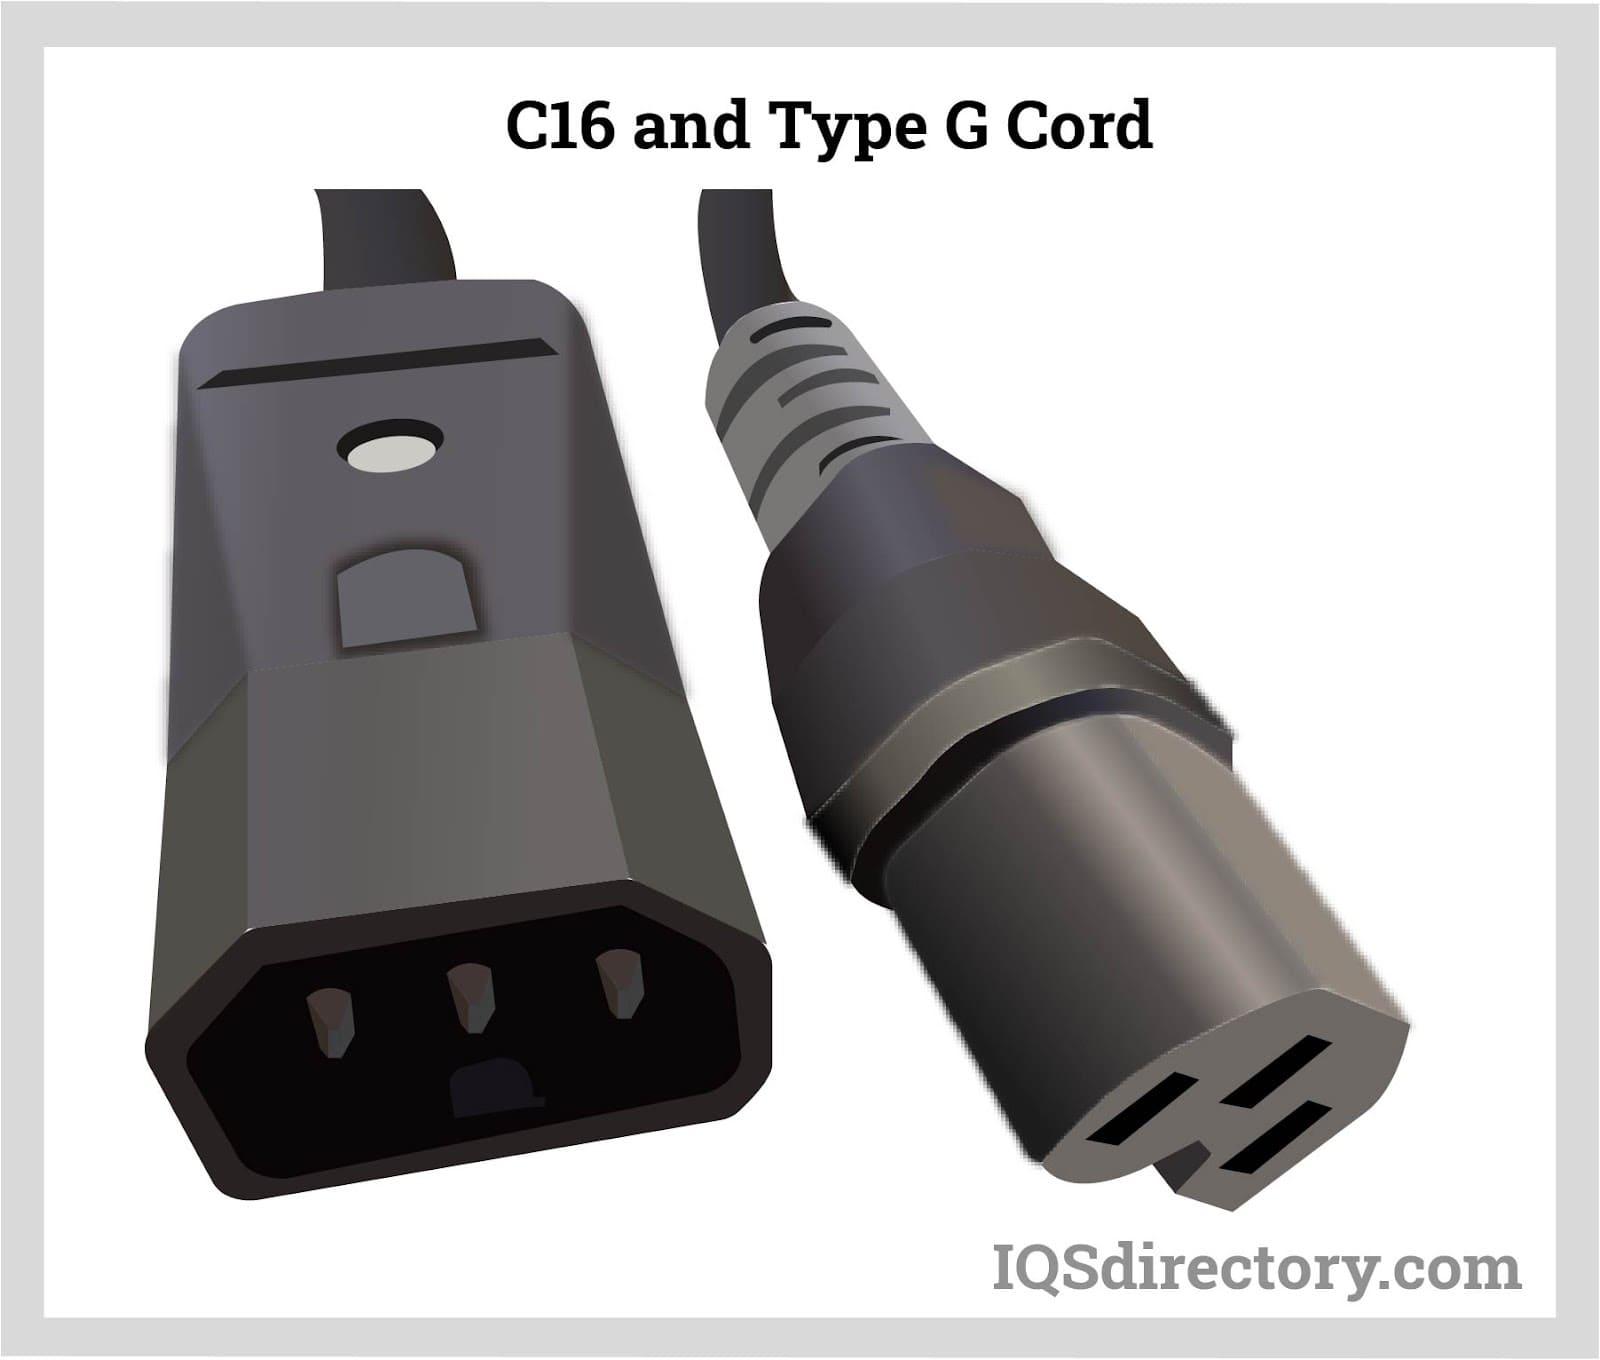 C16 and Type G Cord